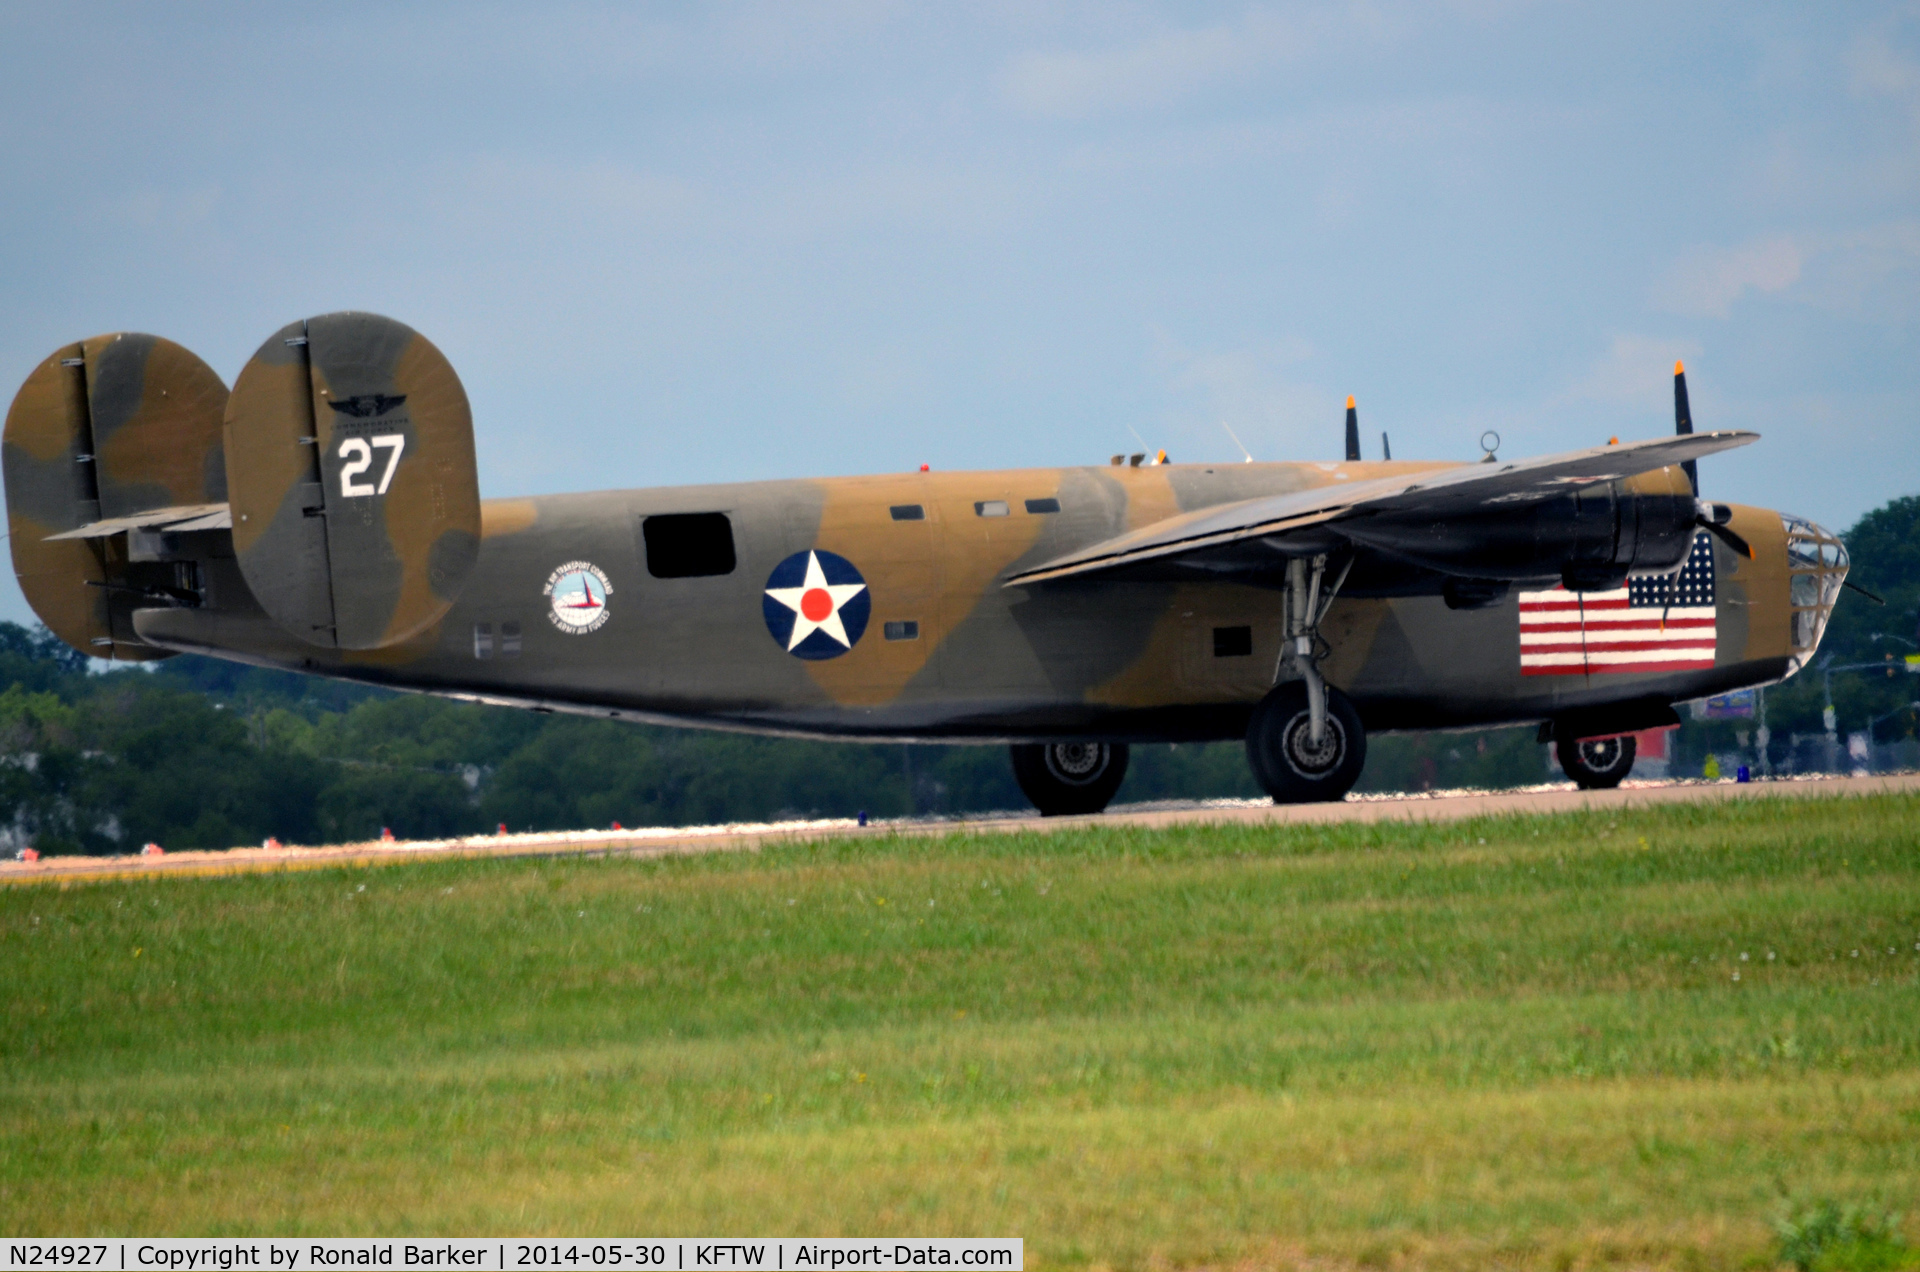 N24927, 1940 Consolidated Vultee RLB30 (B-24) C/N 18, Diamond Lil ready for takeoff, Vintage Flying Museum